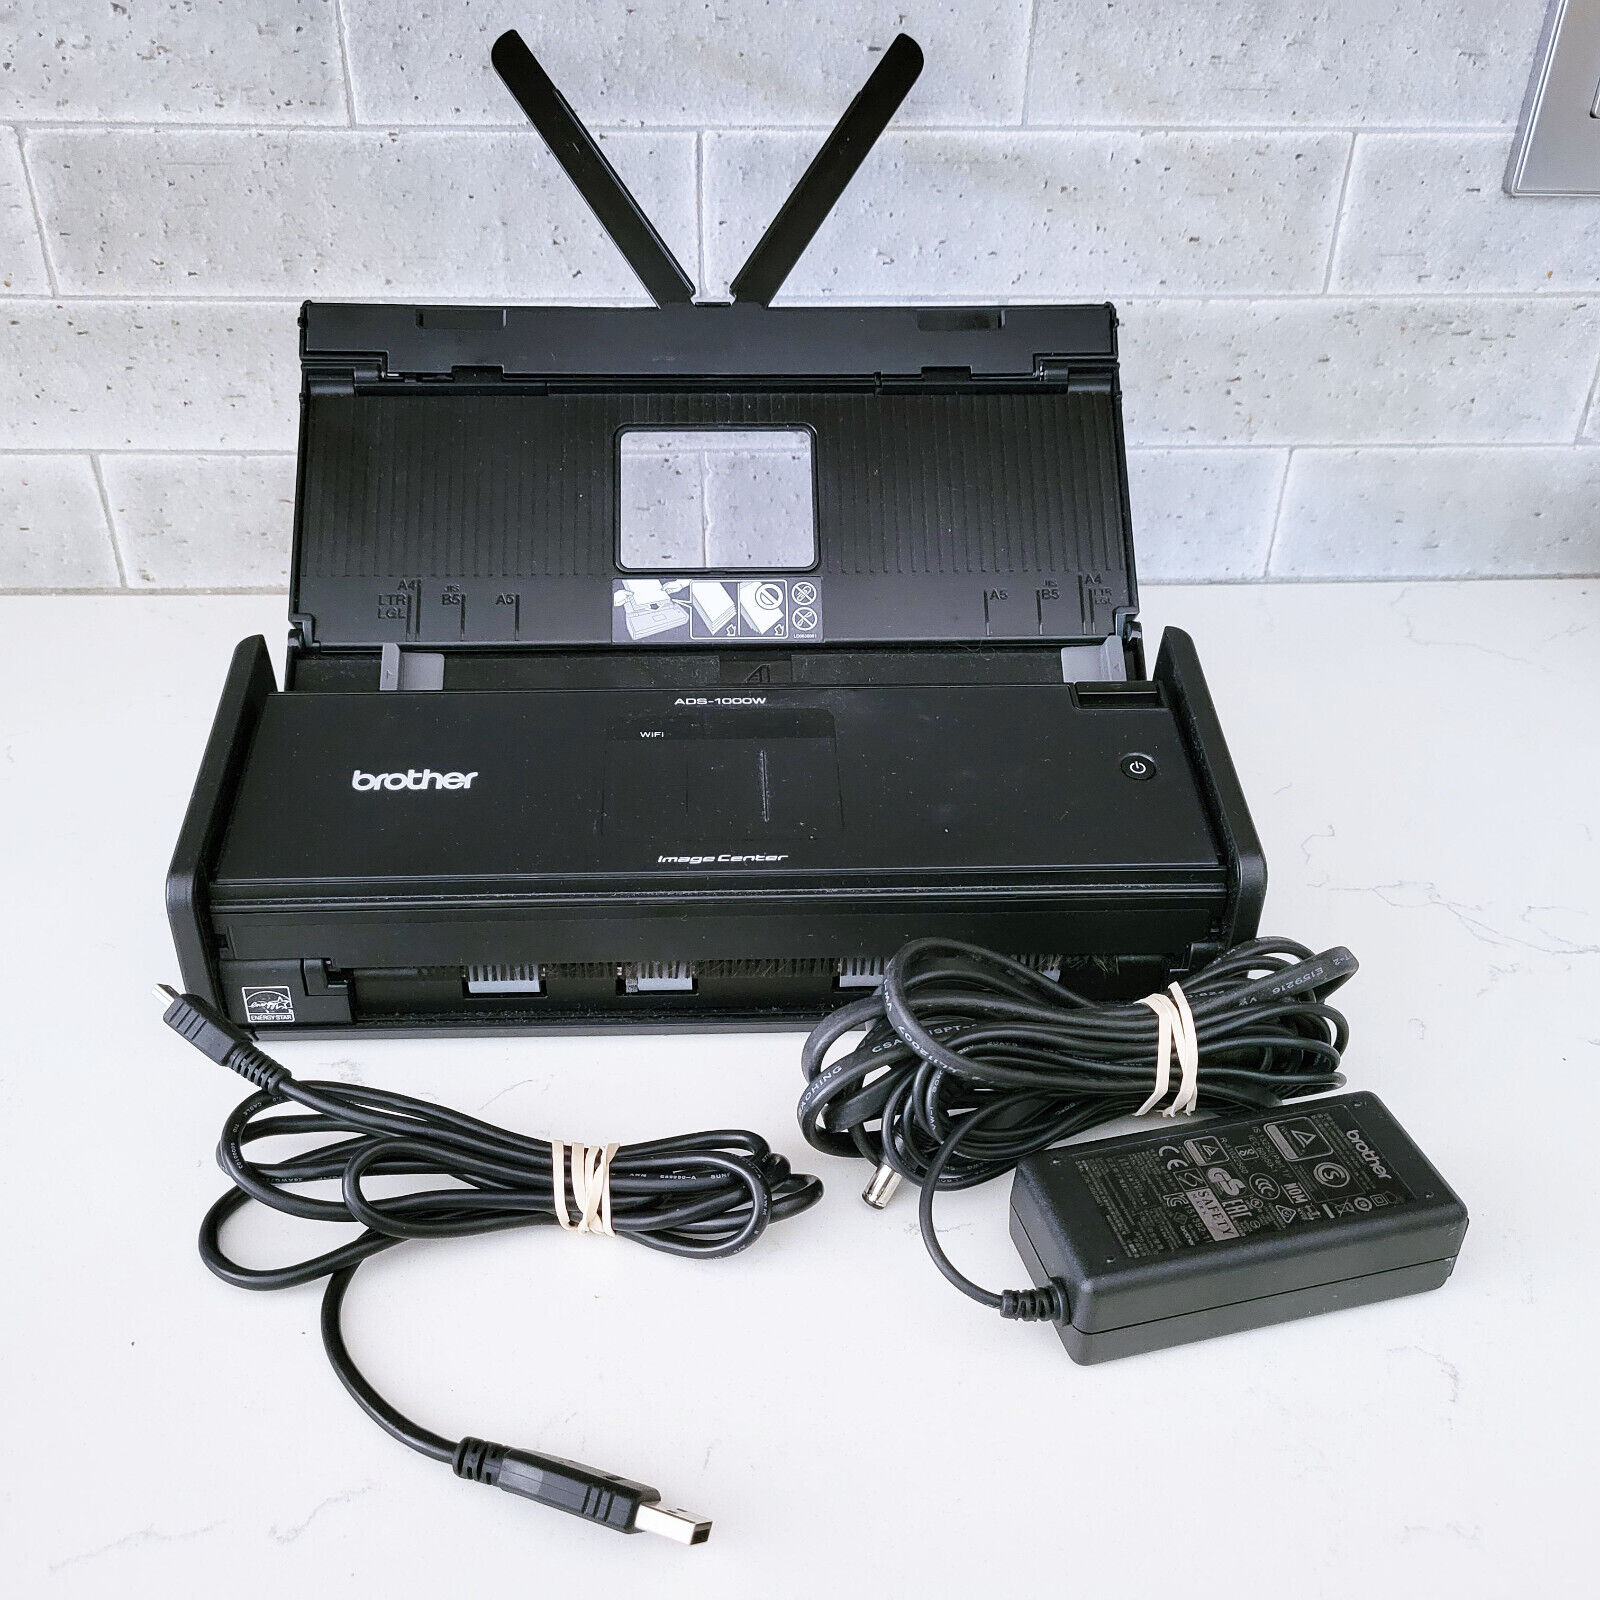 Brother ADS1000W Compact Desktop Scanner Duplex Wireless USB Image Center Tested